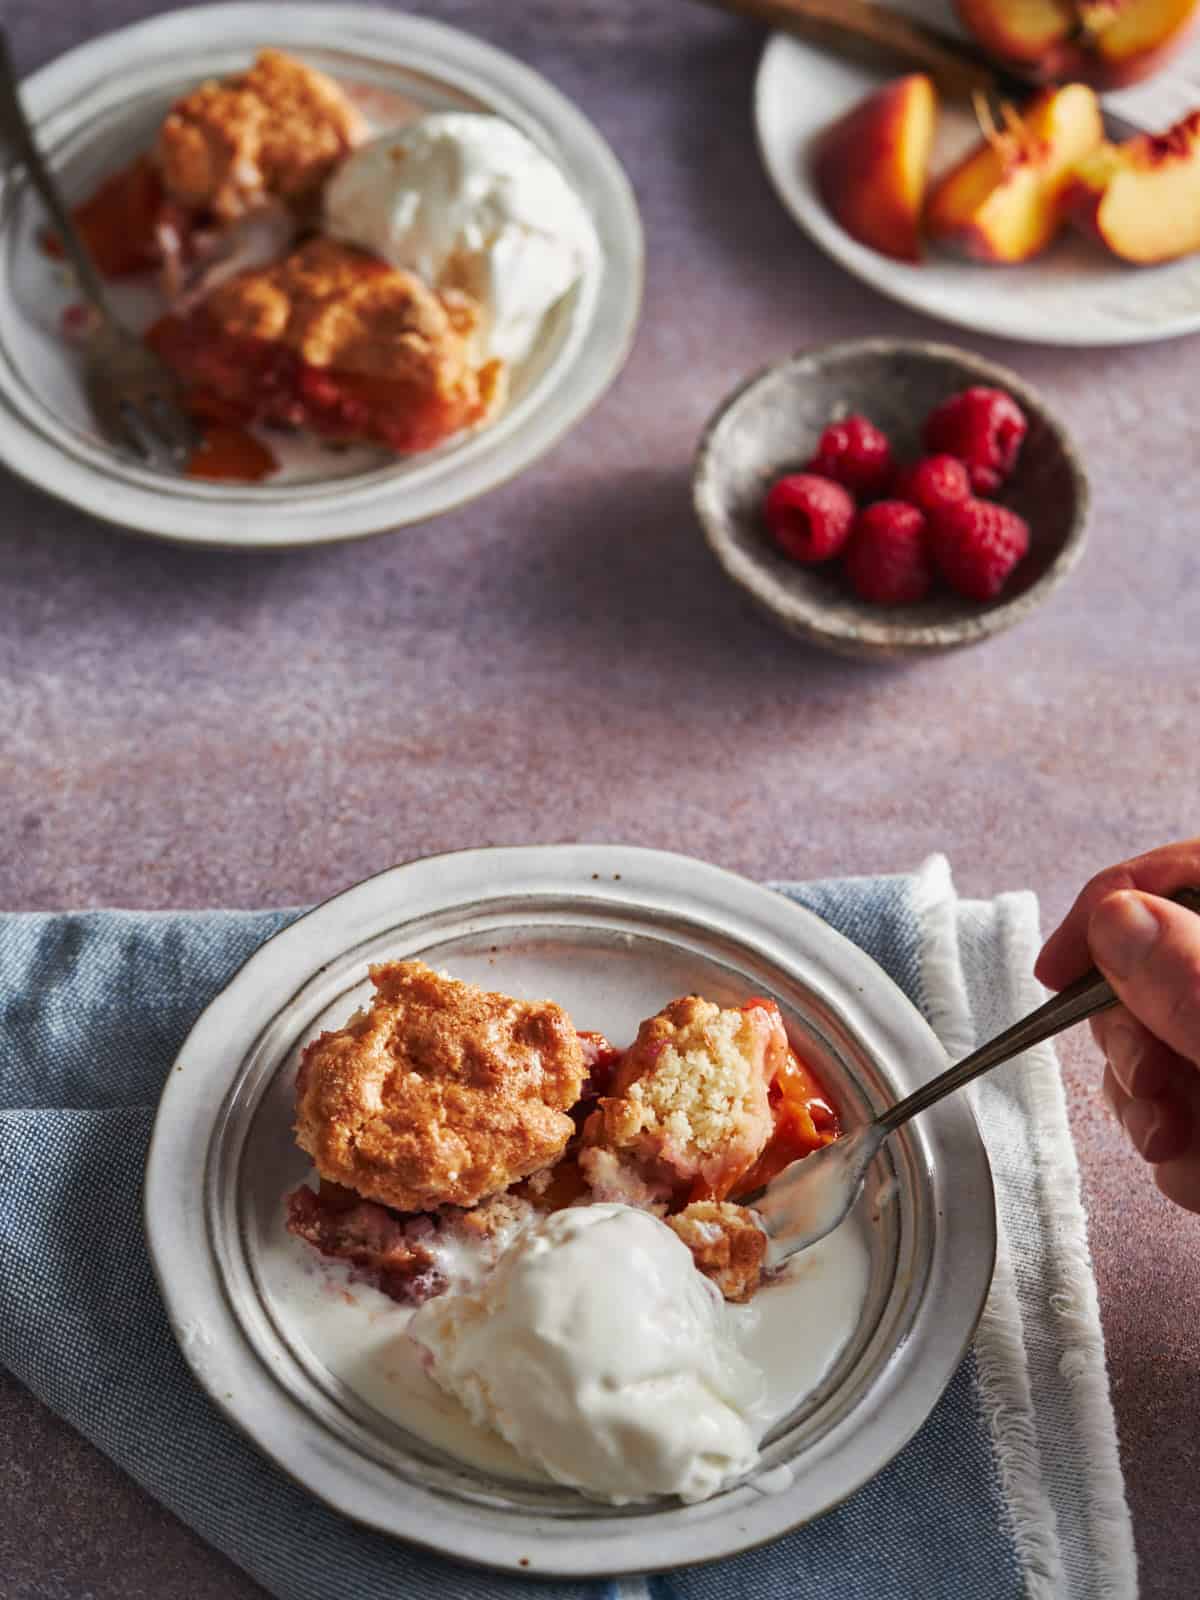 I'm cutting a slice of Peaches and Raspberries Cobbler in a white plate. The slice shown all fruit baked inside. It is served with some ice-cream